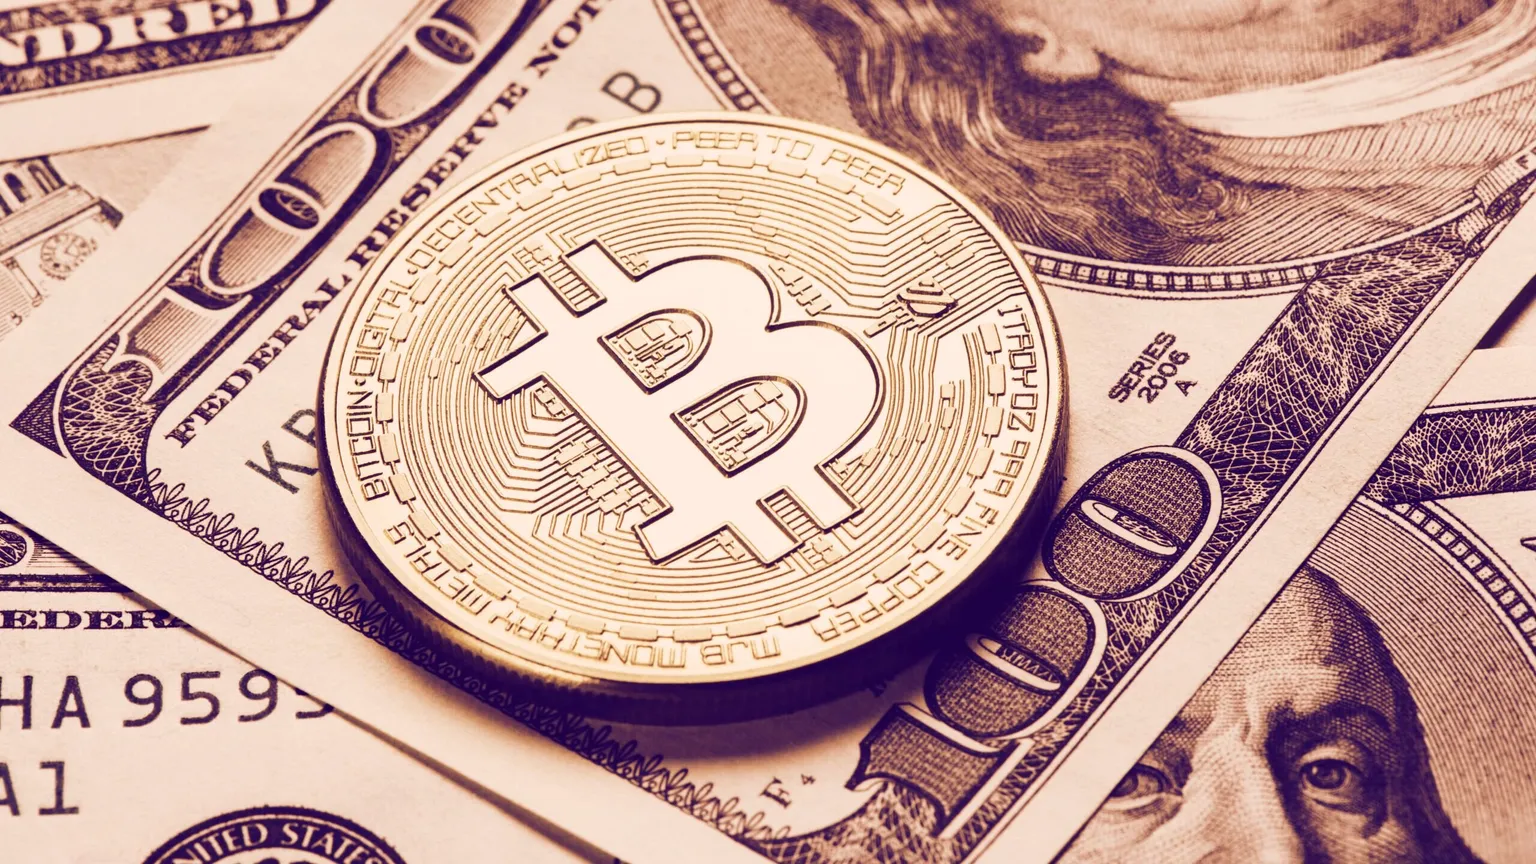 A top-ranked officials sees a future for Bitcoin. Image: Shutterstock